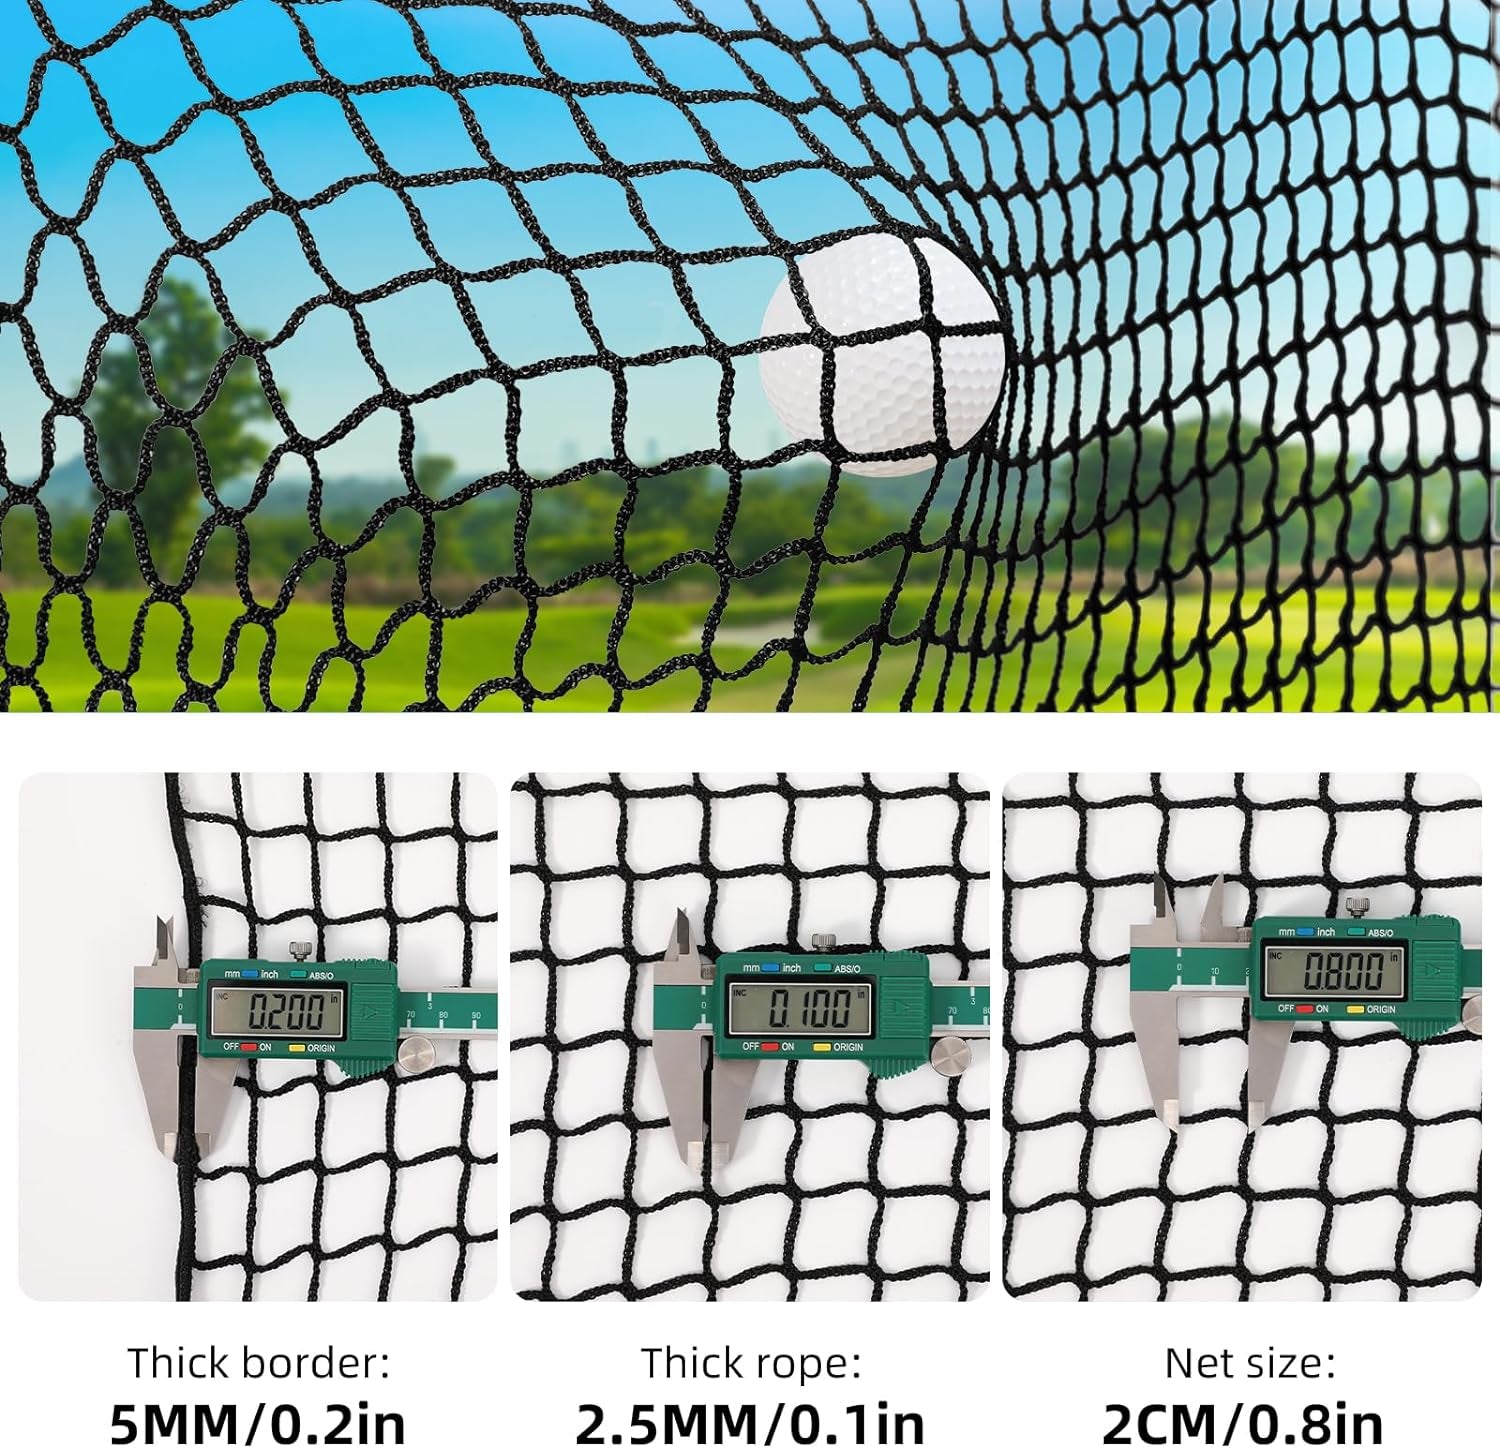 10X10X10Ft Golf Net without Frame, Golf Batting Cage Net with Quick Installation Tool and Rope, Golf Practice Net for Indoor, Outdoor, Ceiling, Garage, Driver, Golf Simulator, Impact Screen